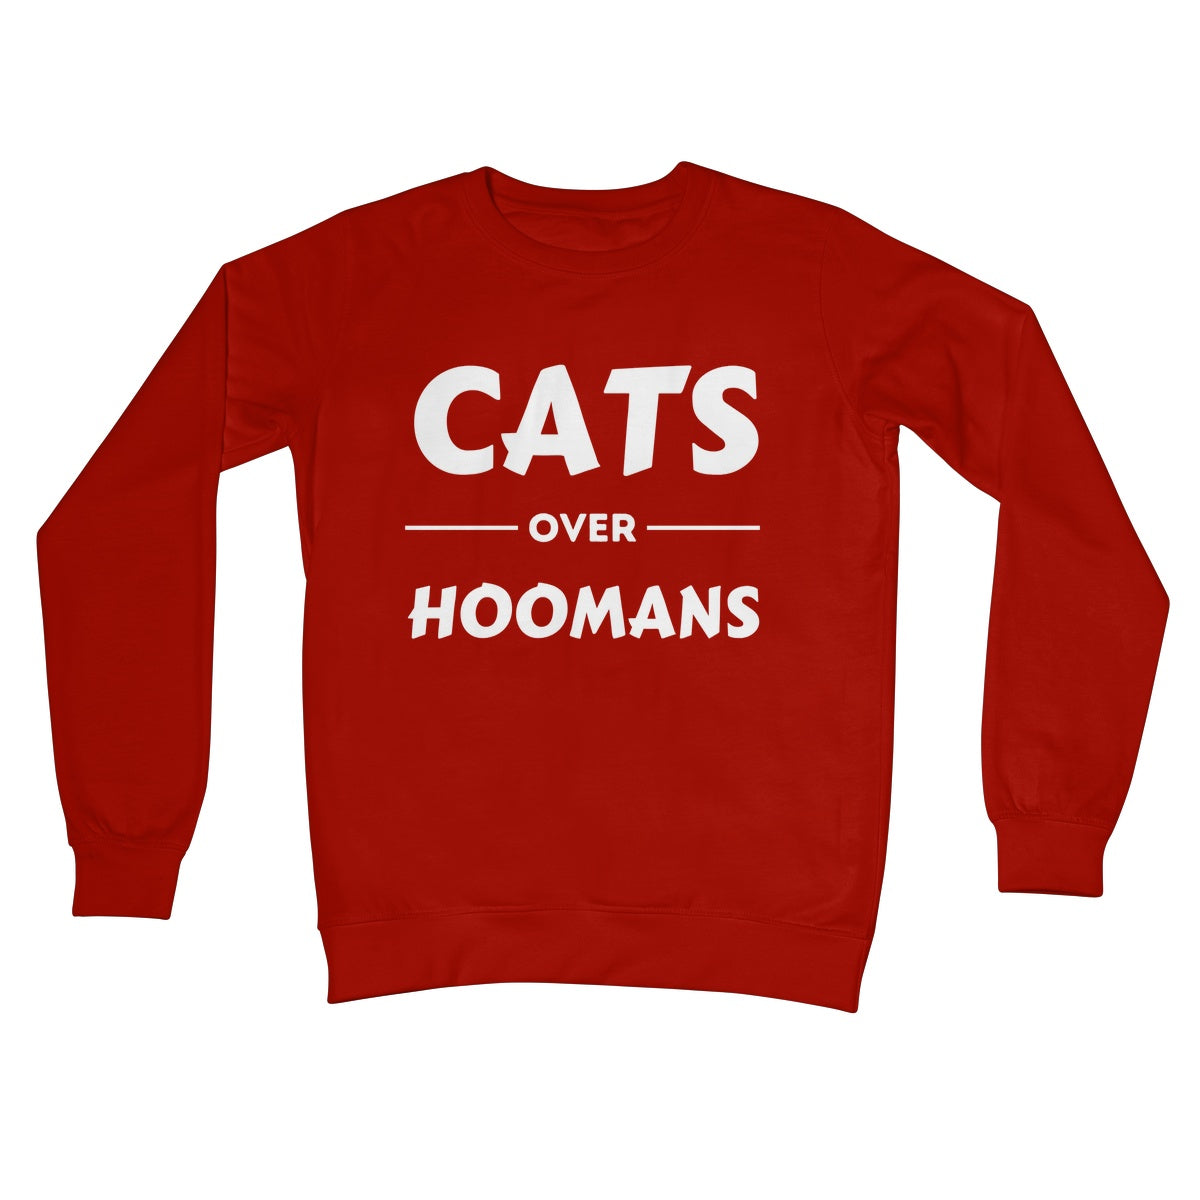 cats over hoomans jumper red